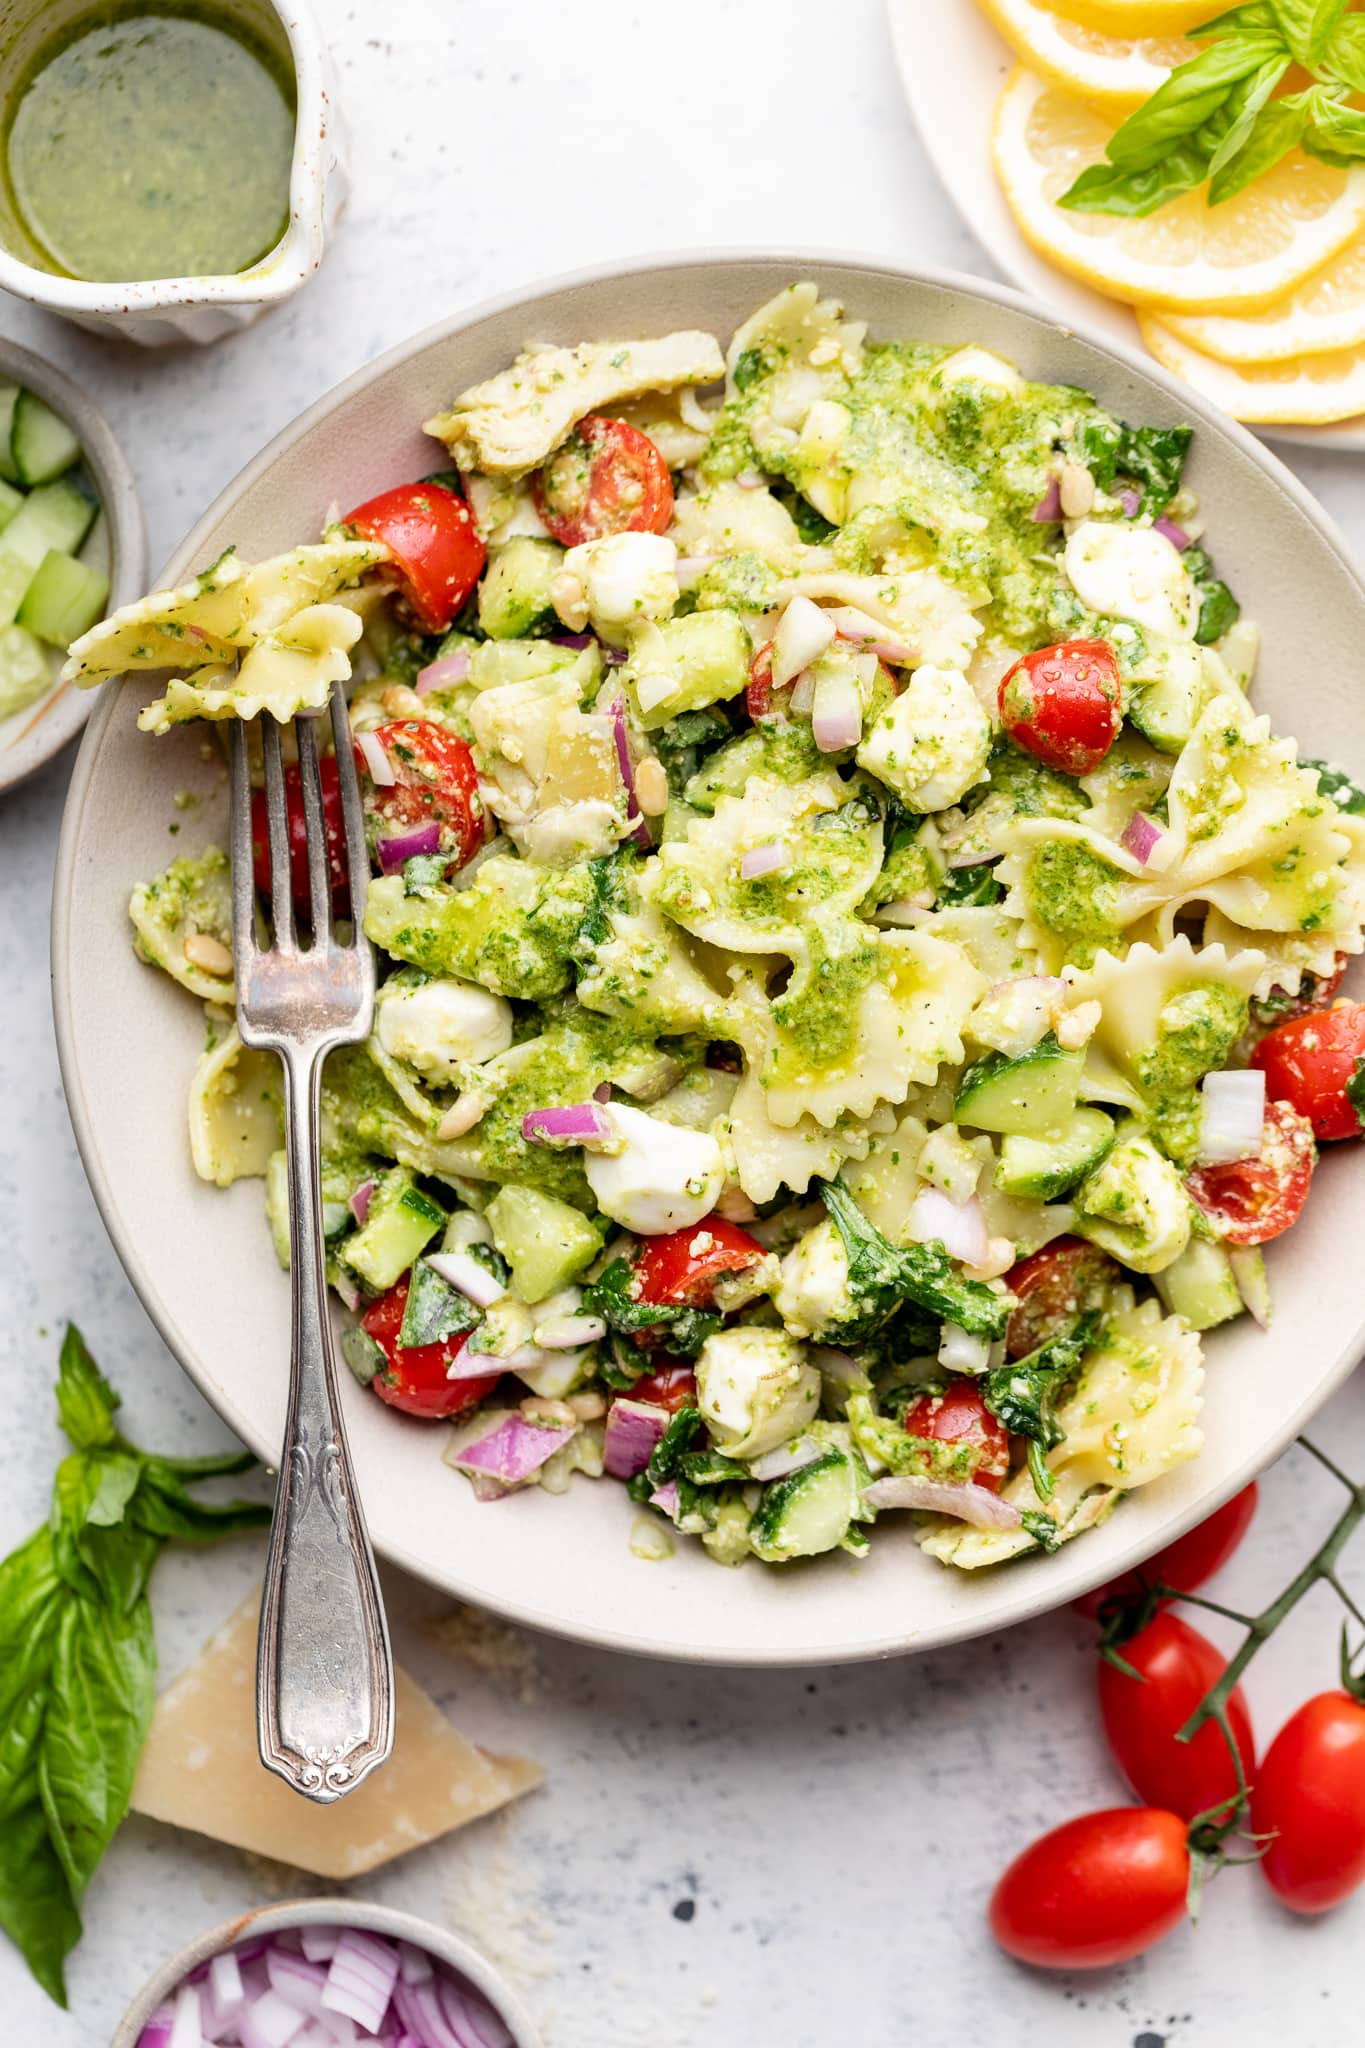 Pesto Pasta Salad - All the Healthy Things